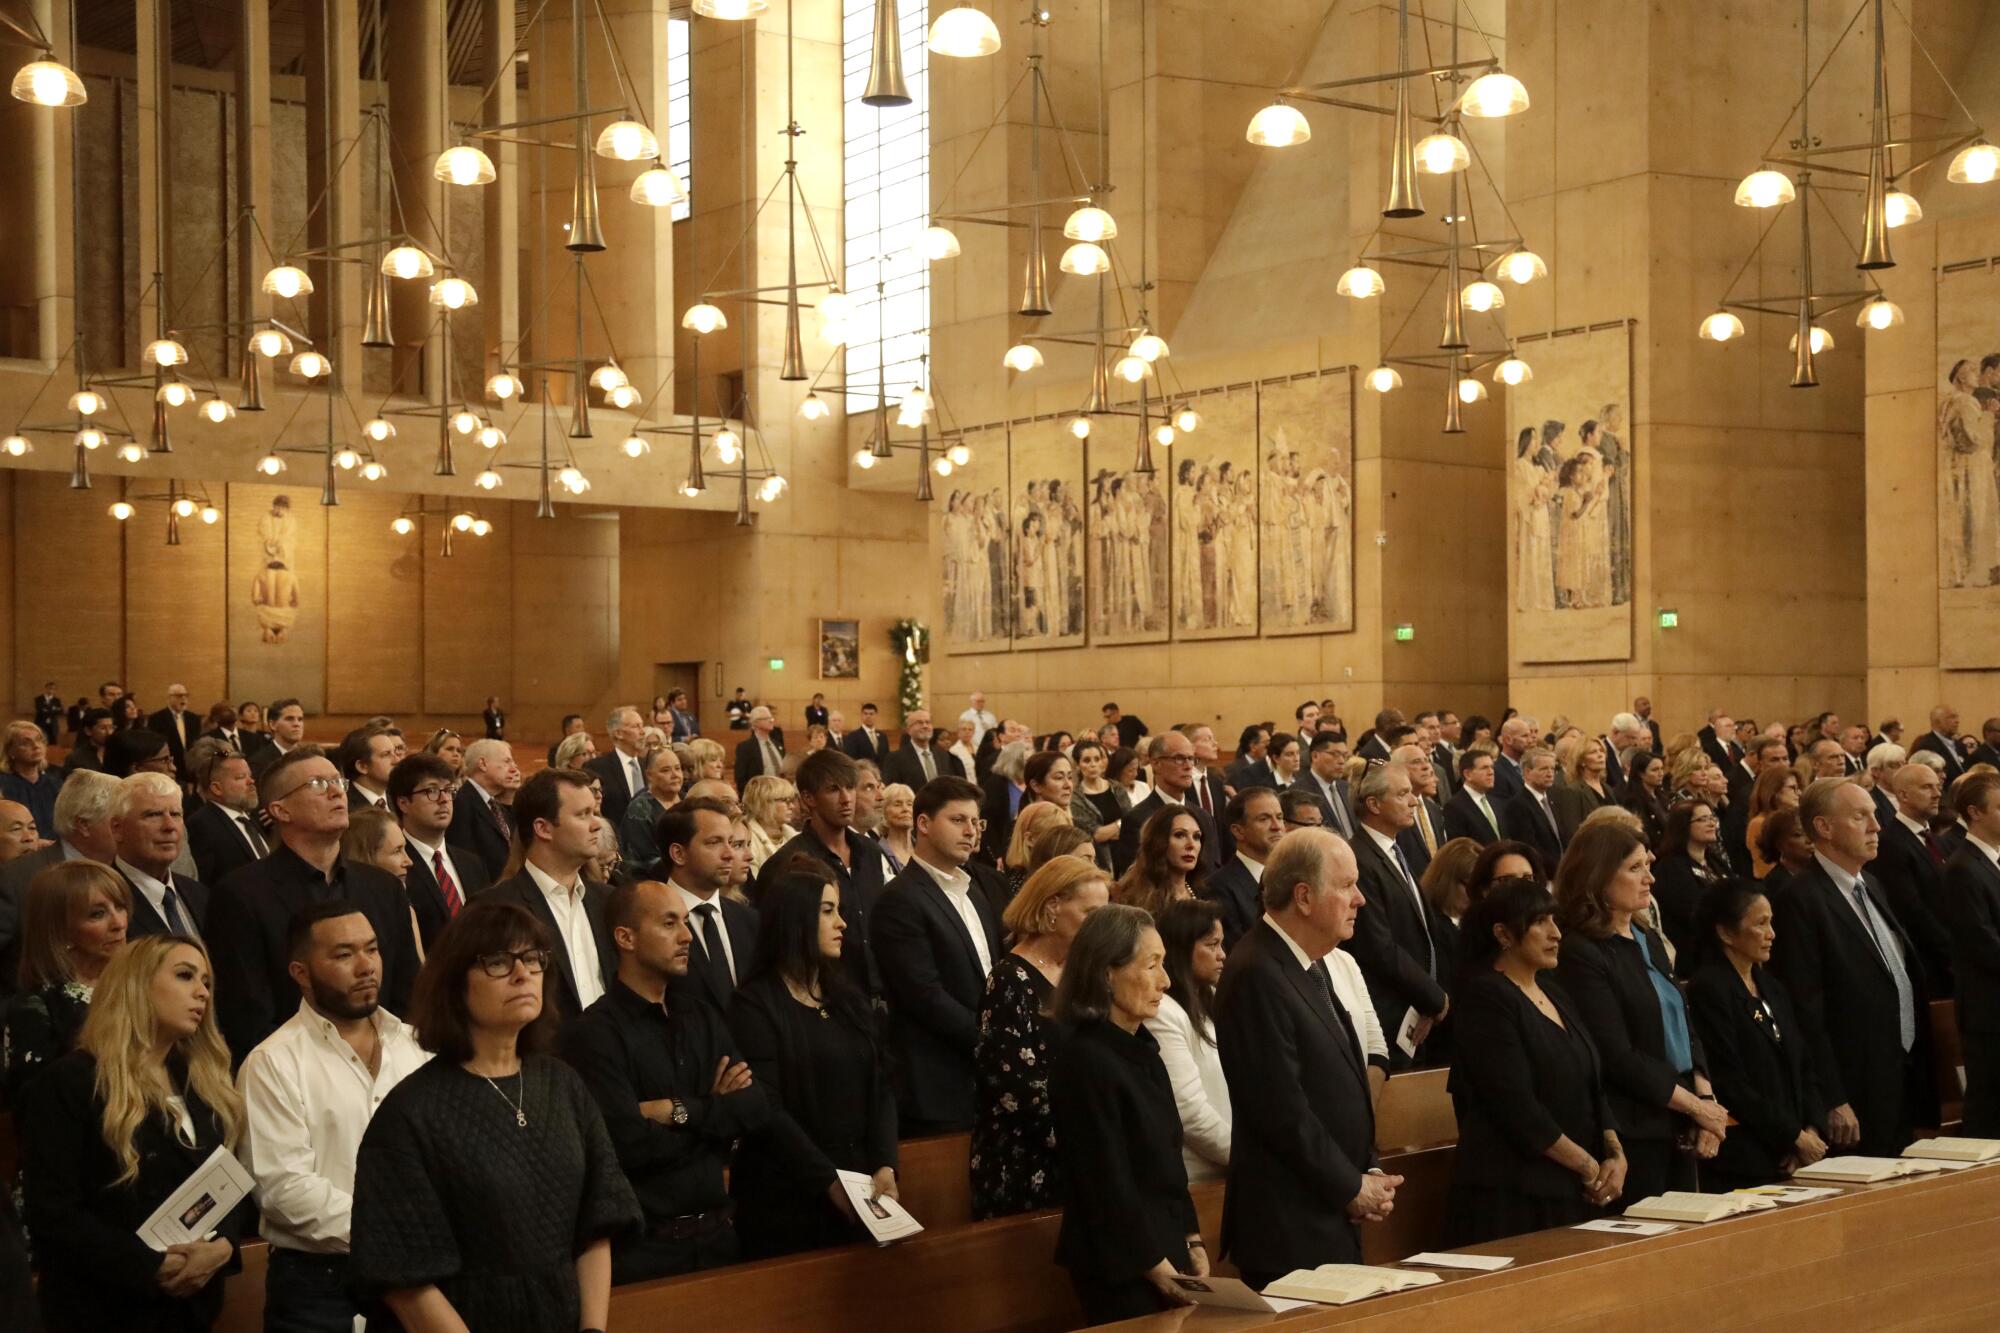 Current and former L.A. officials were among those in attendance at the memorial Mass for Richard Riordan 